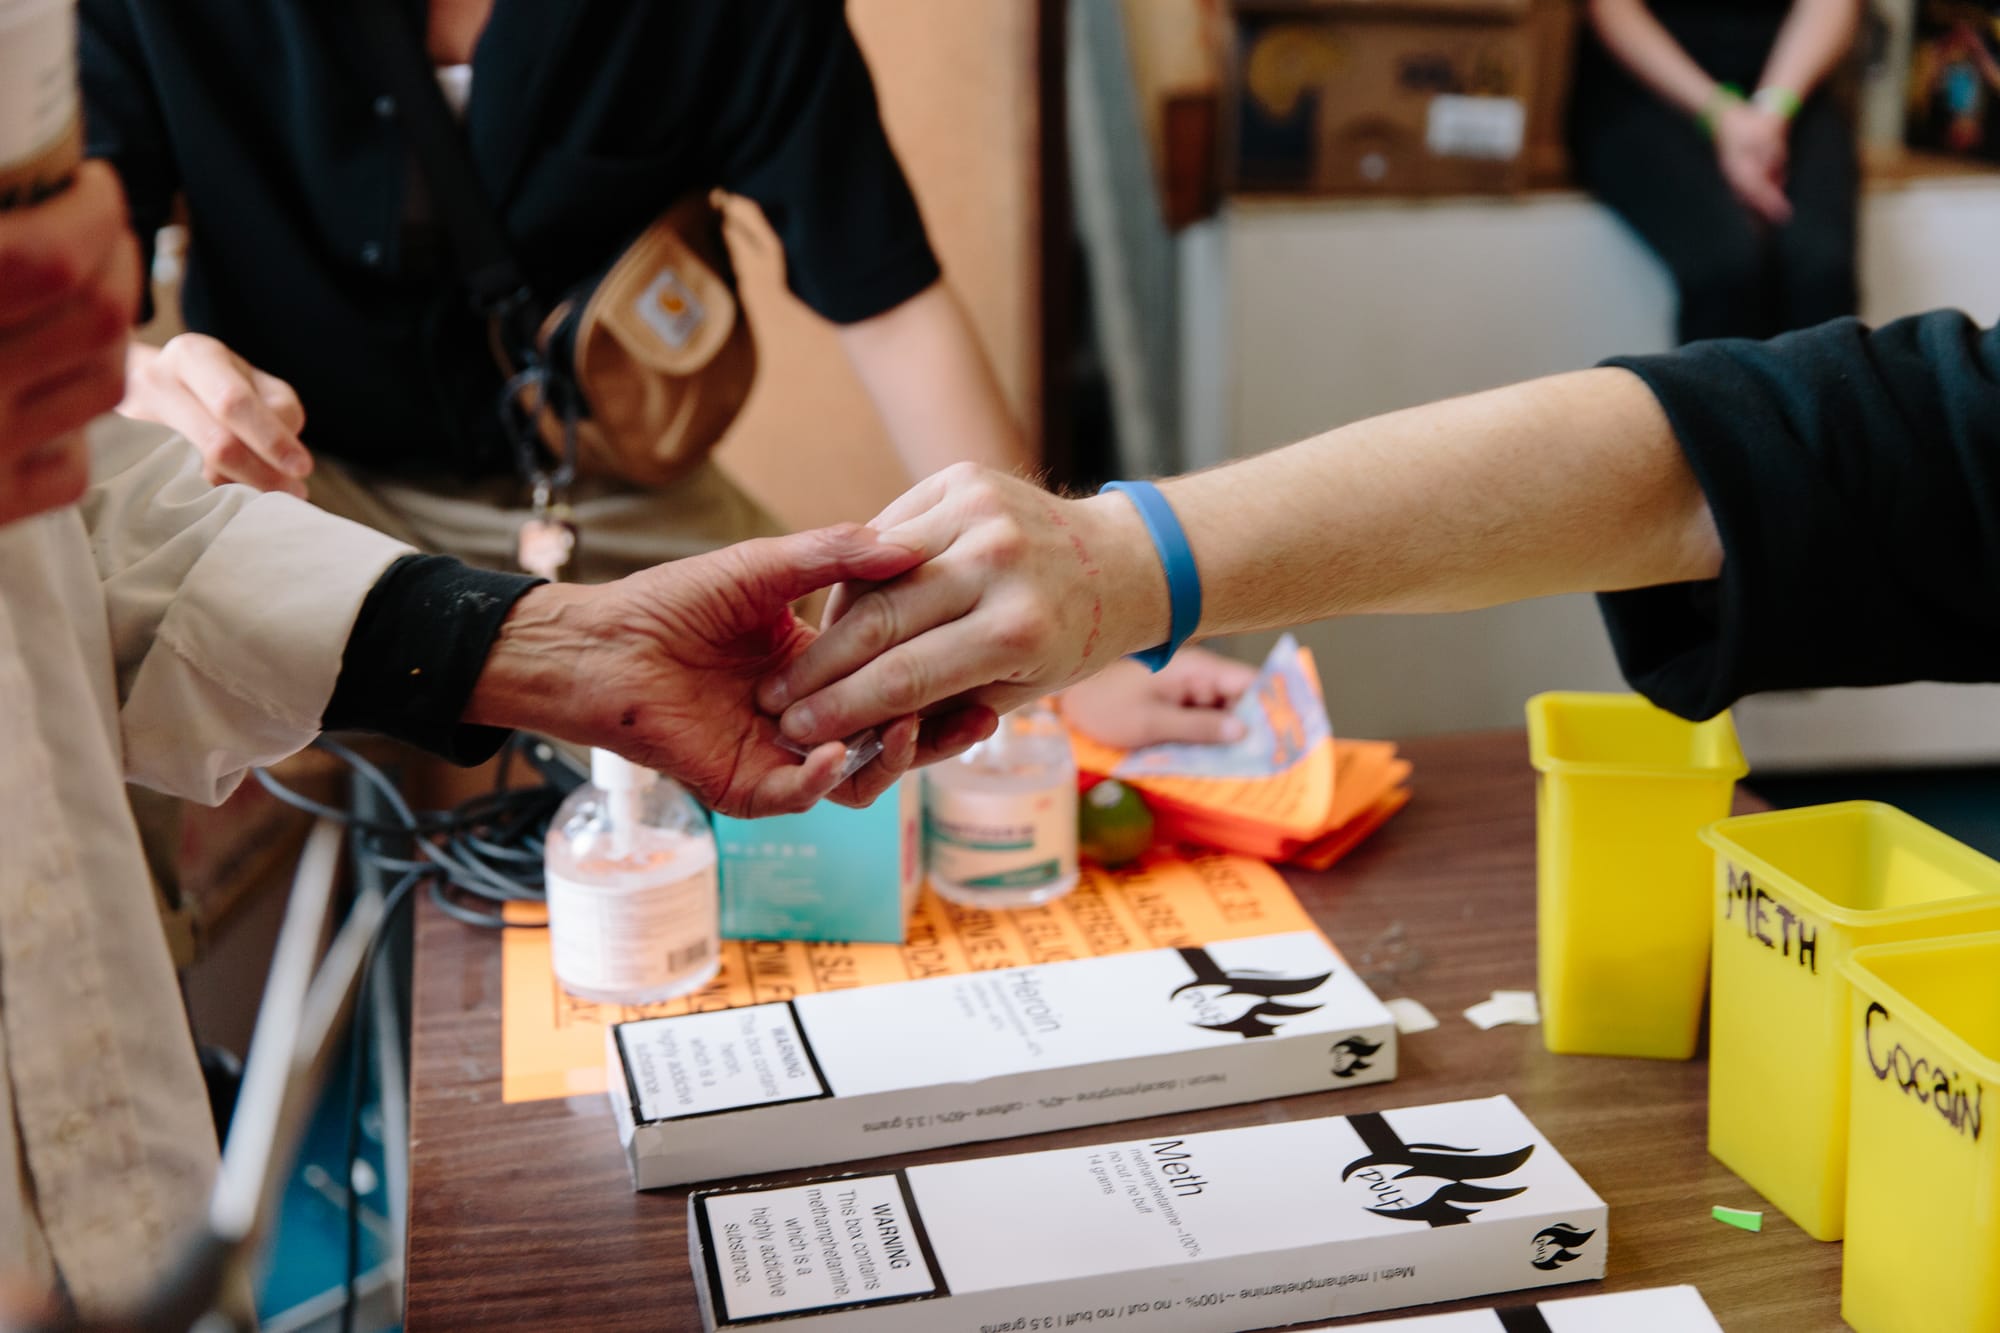 Two hands meet over a table, giving and receiving a regulated drug in a small baggie. Boxes indicating regulated heroin and meth are visible nearby.